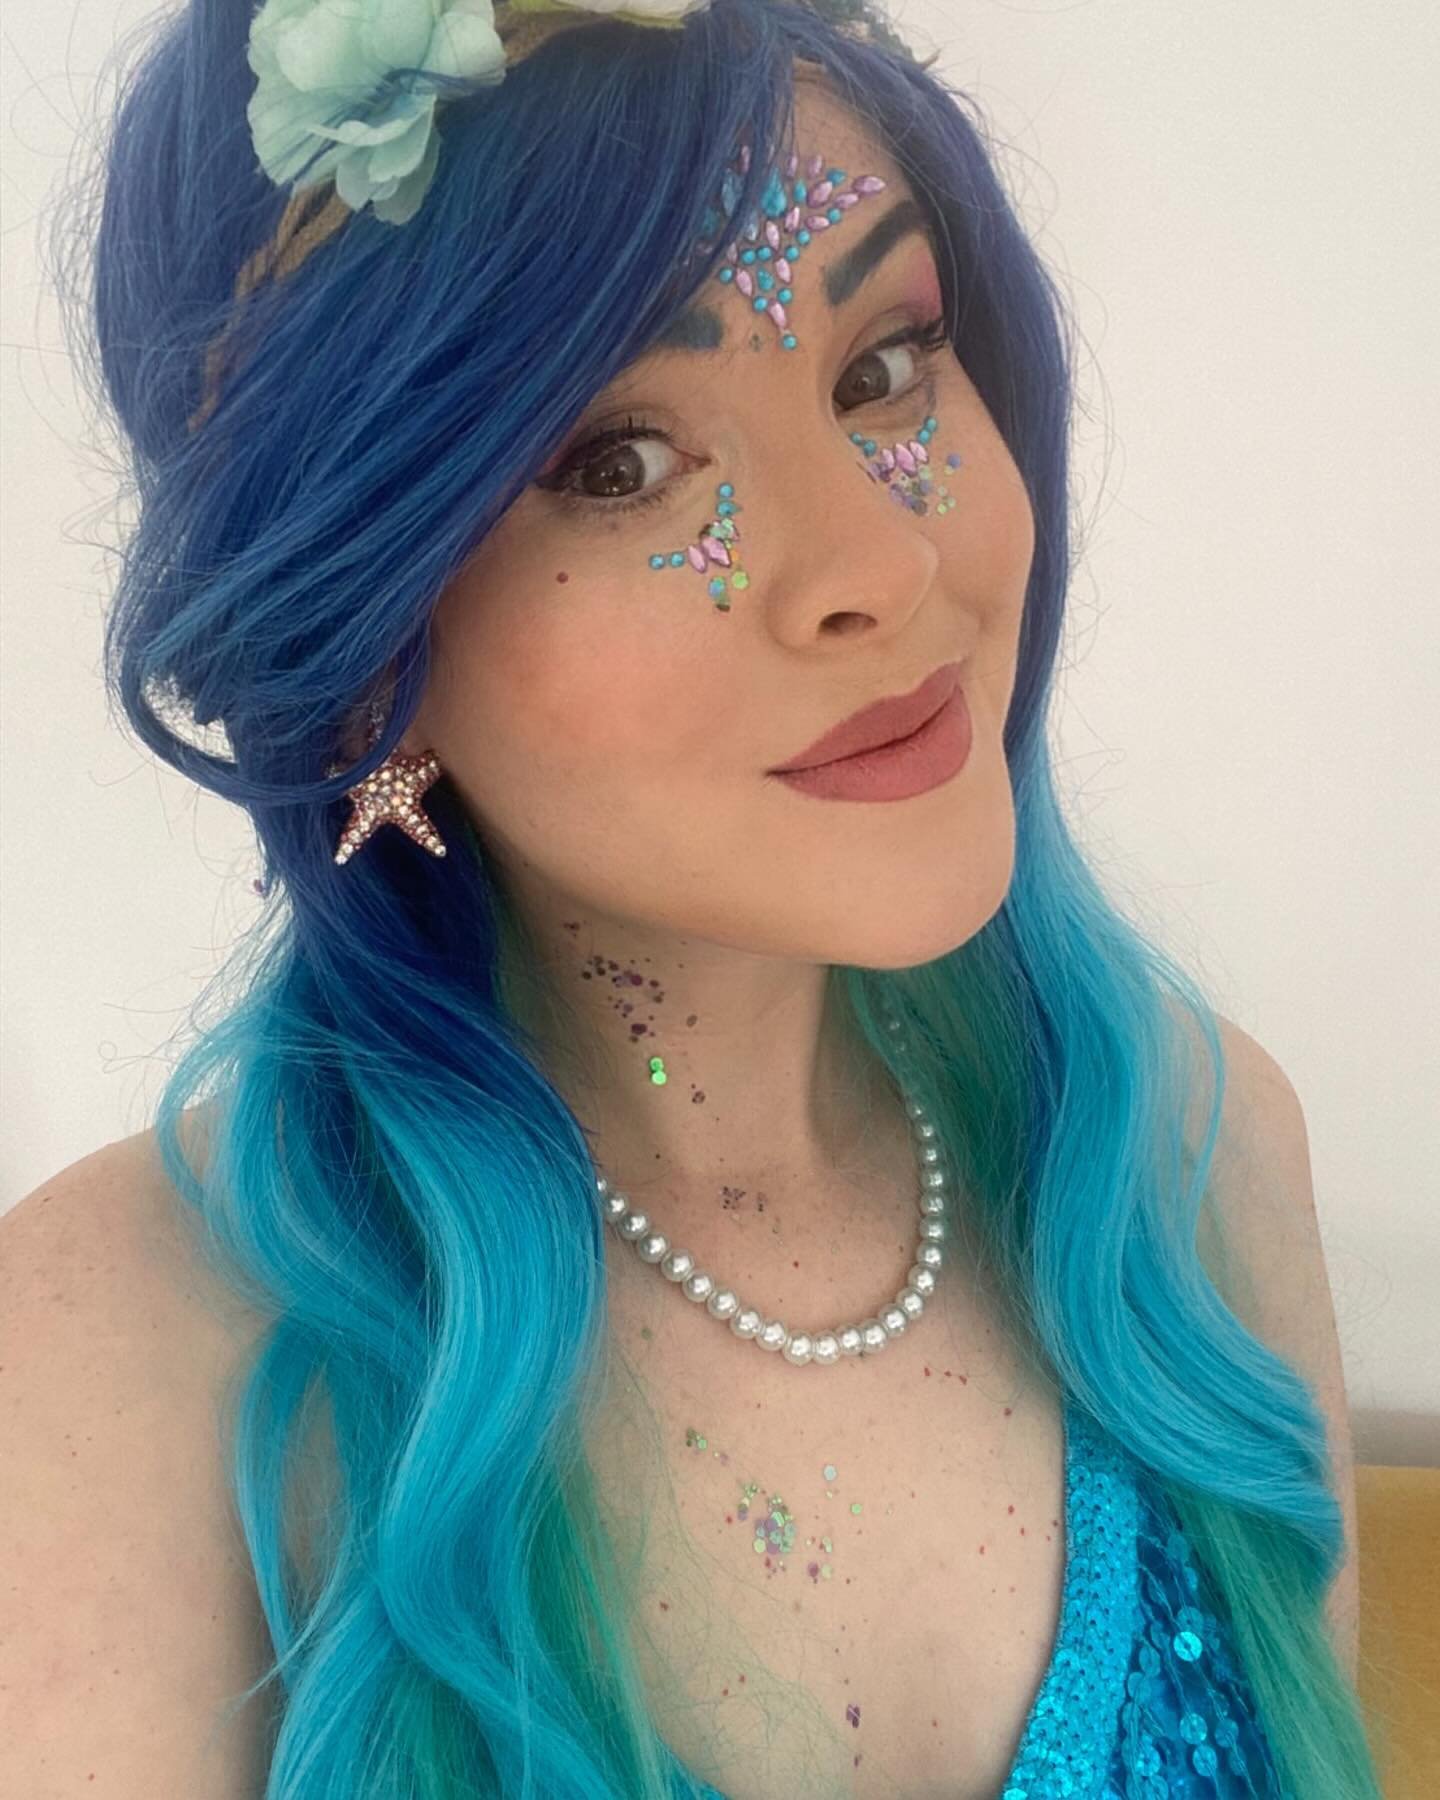 Magical Mermaid Aquaria just had wonderful video birthday call with a special little girl! She sent her a shell decorating kit and they sang together, painted shells and talked about life on the land and the sea! Truly magical 🧜🏻&zwj;♀️🧜⭐️